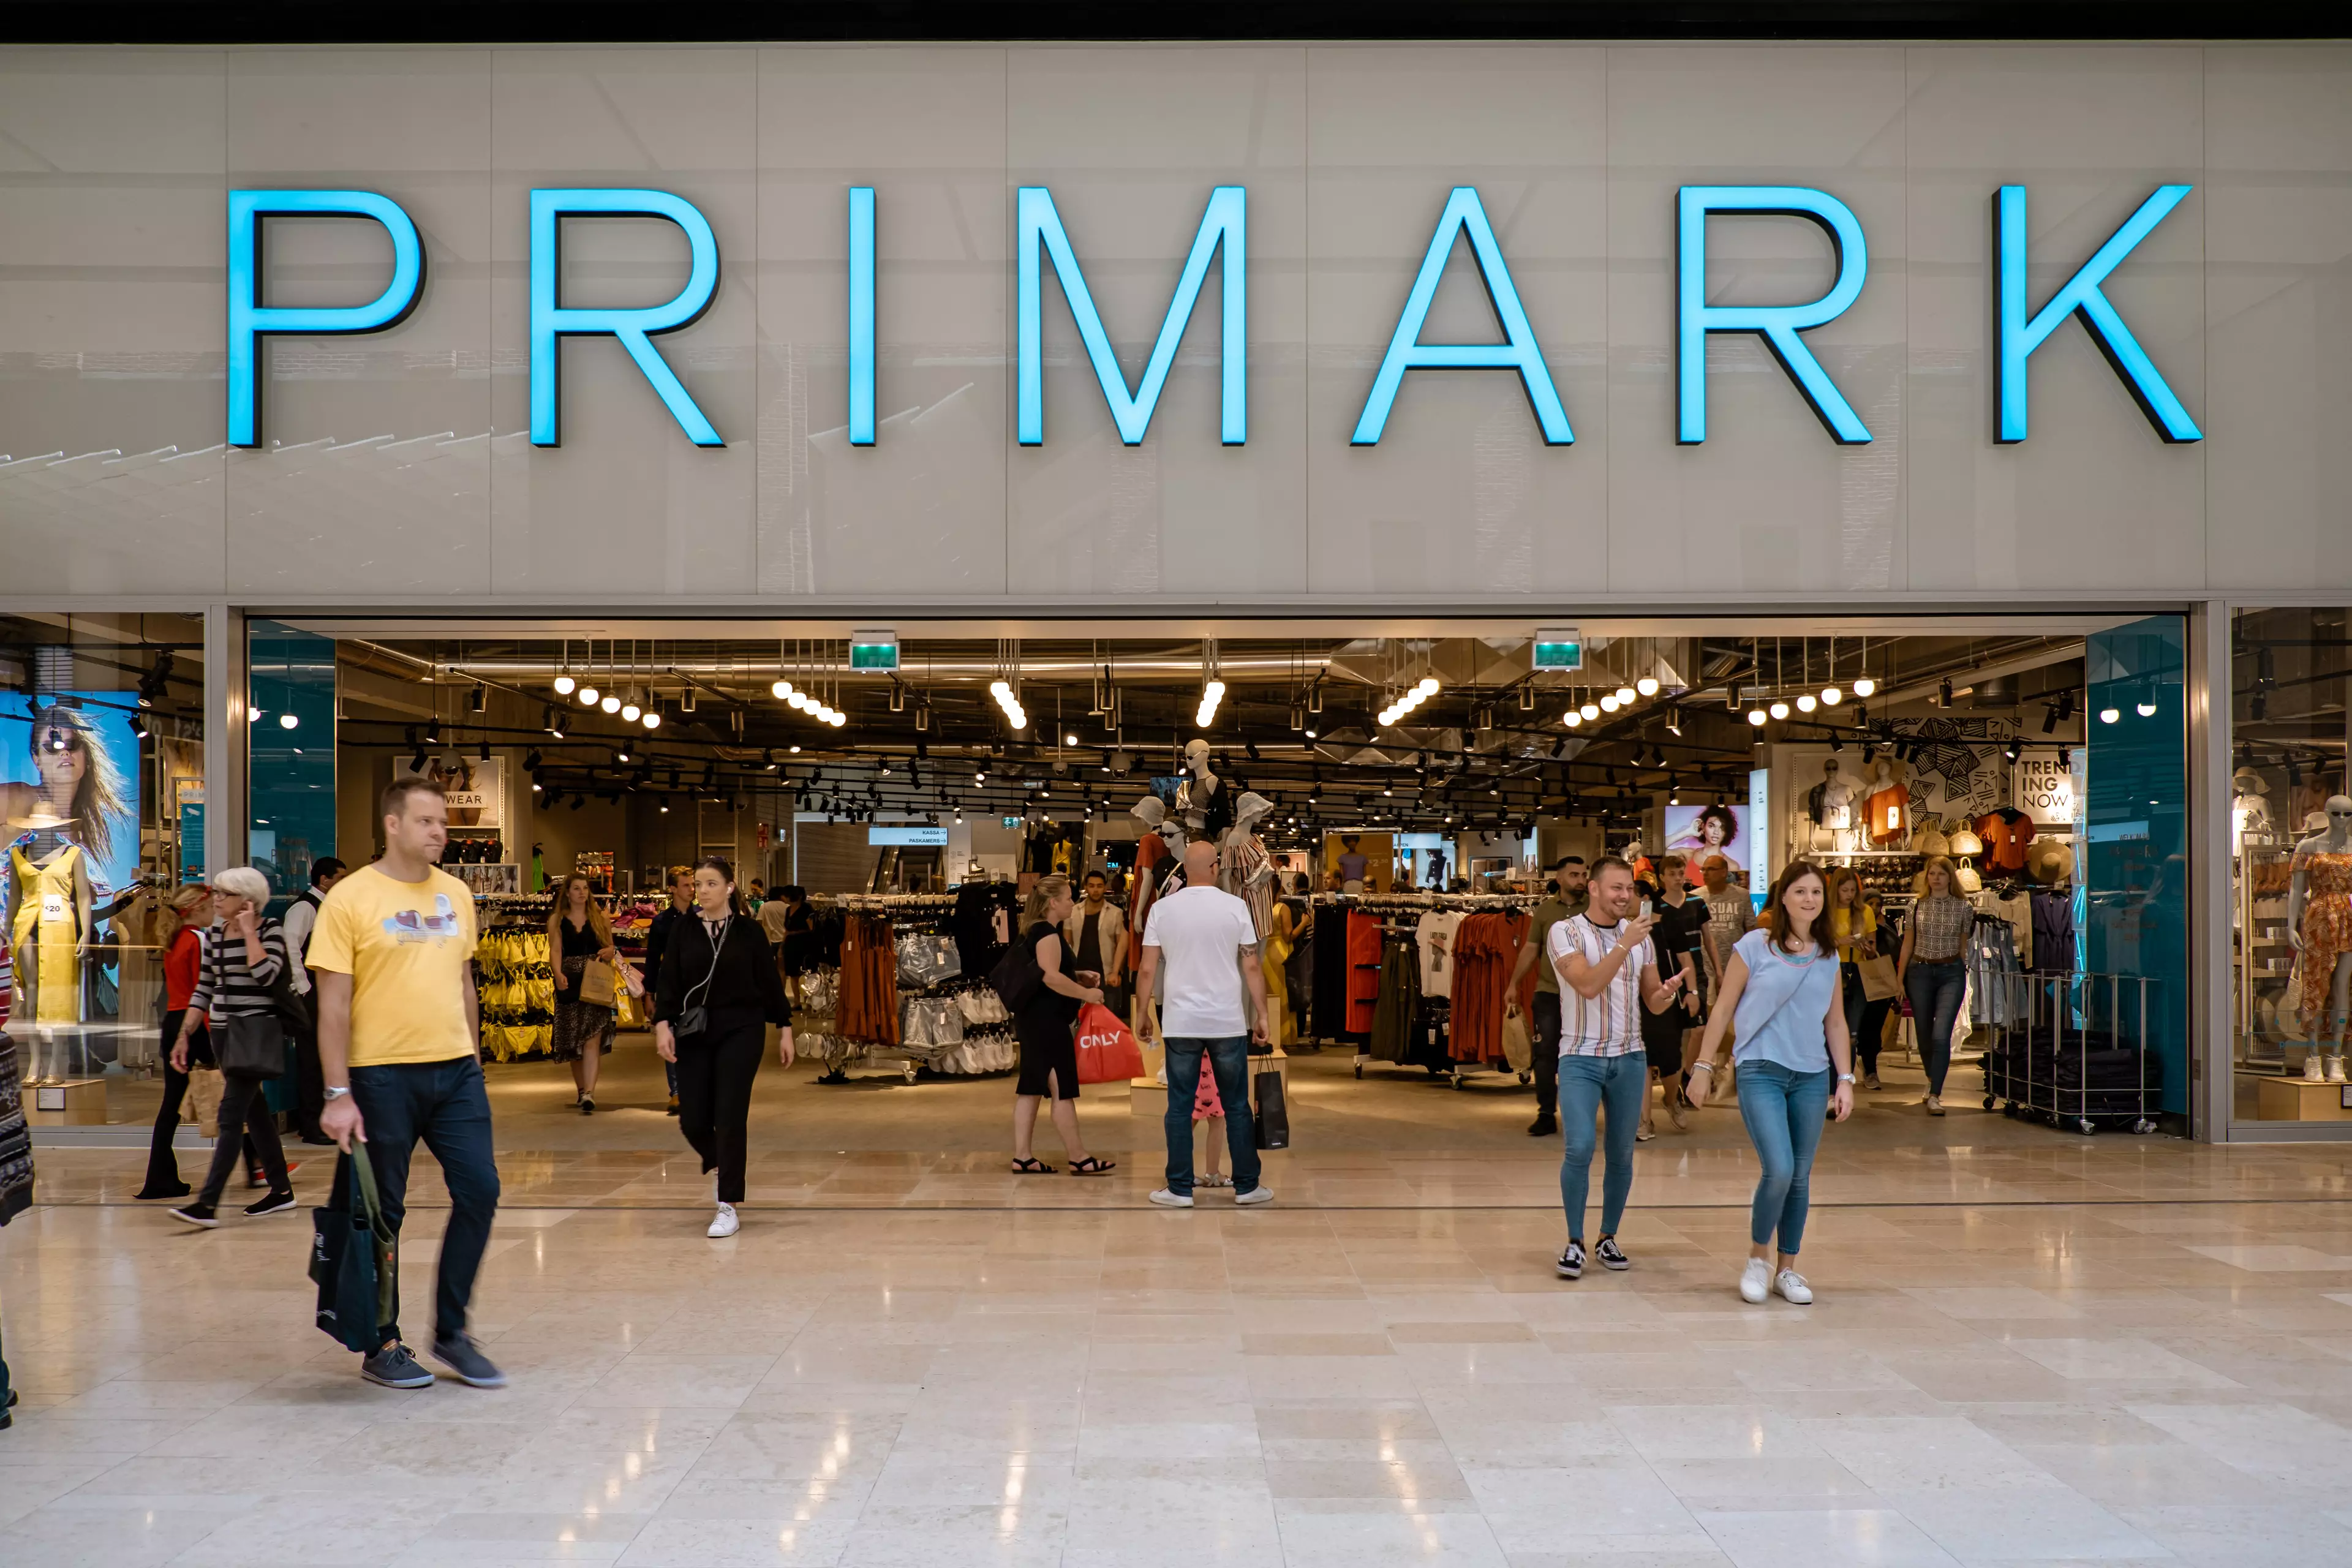 Finally, we know how to pronounce Primark (